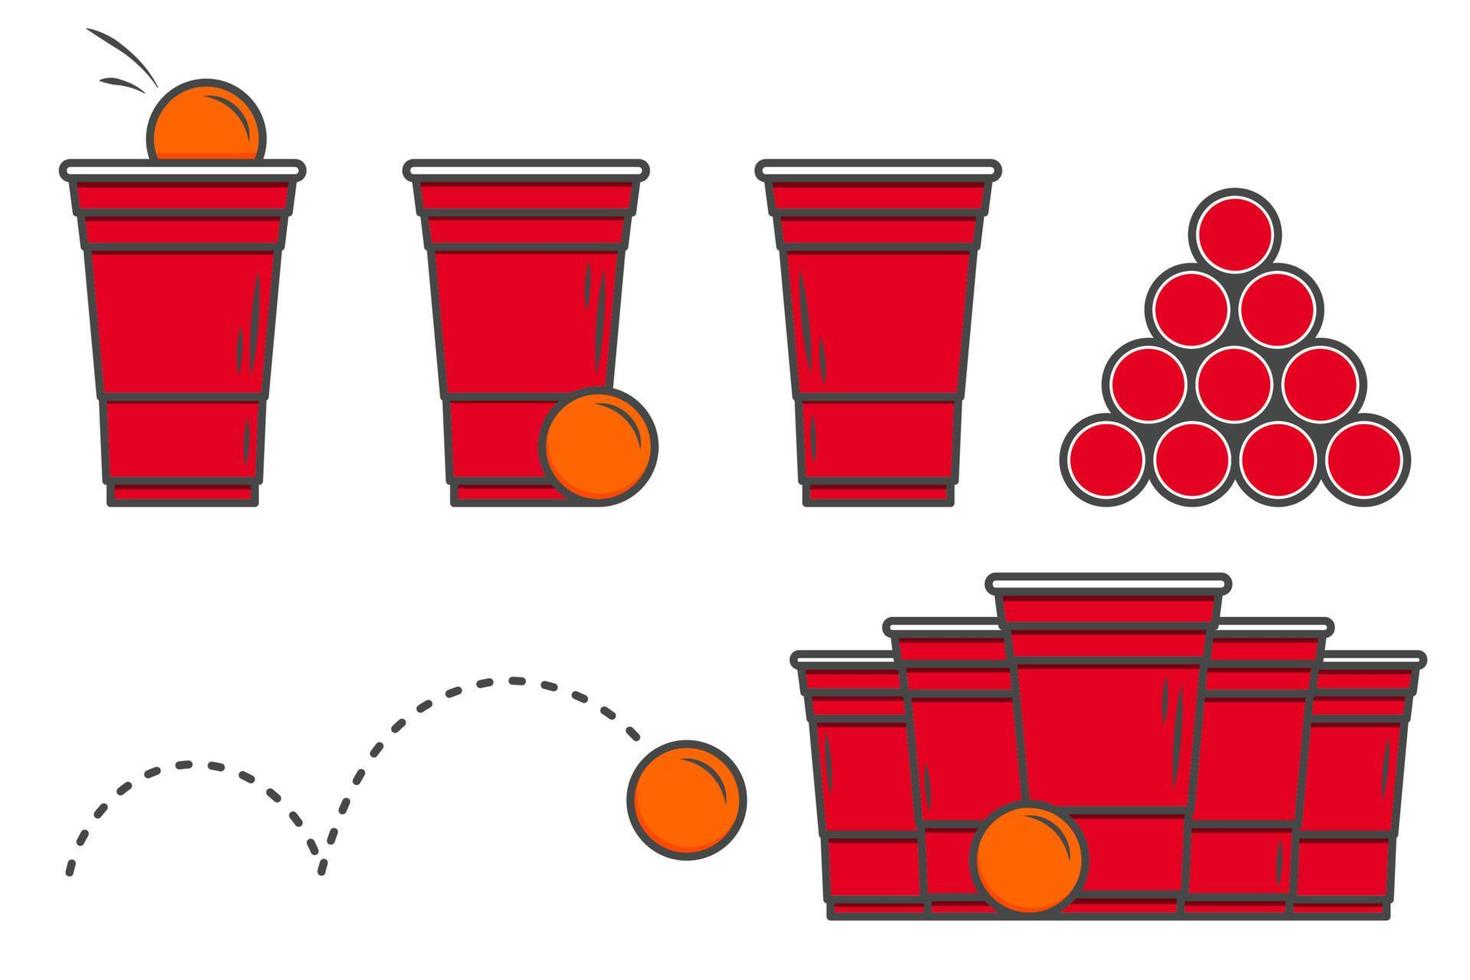 Red beer pong illustration. Plastic cup and ball with splashing beer. Traditional party drinking game. Vector